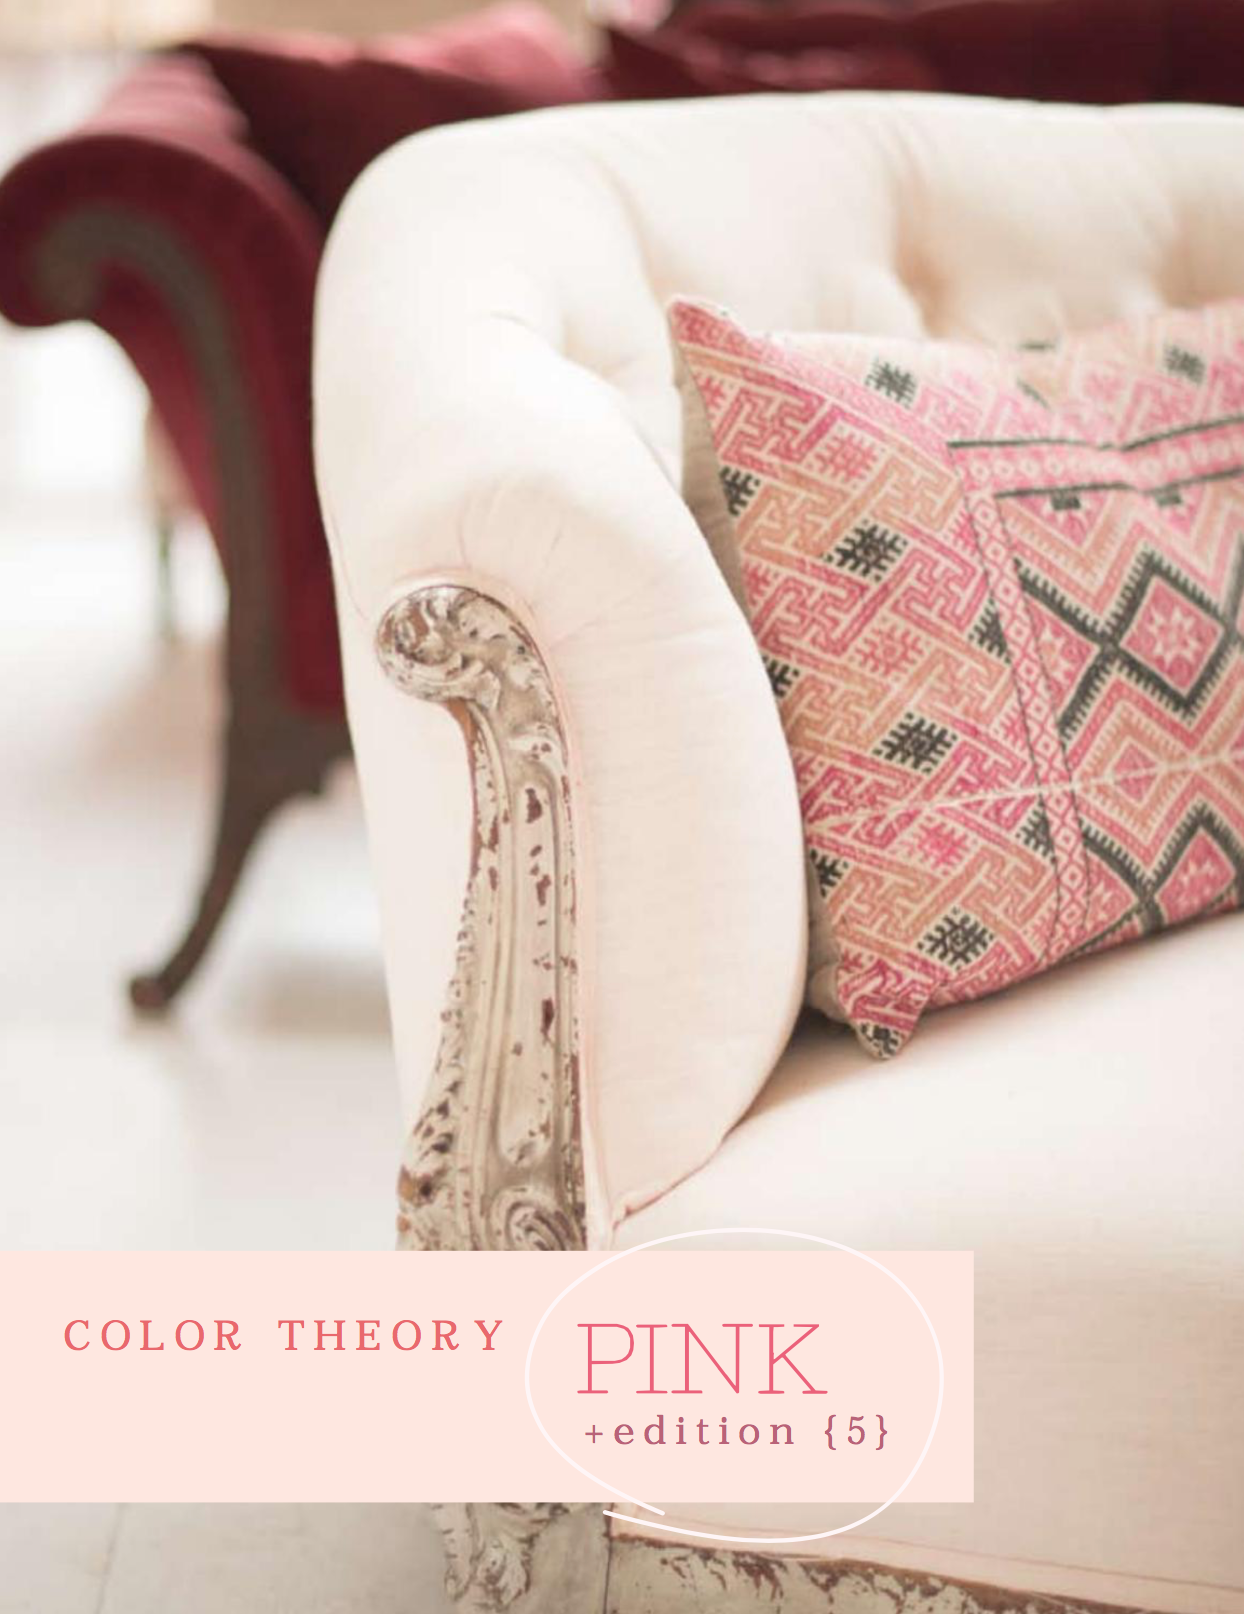 COLOR THEORY // PINK